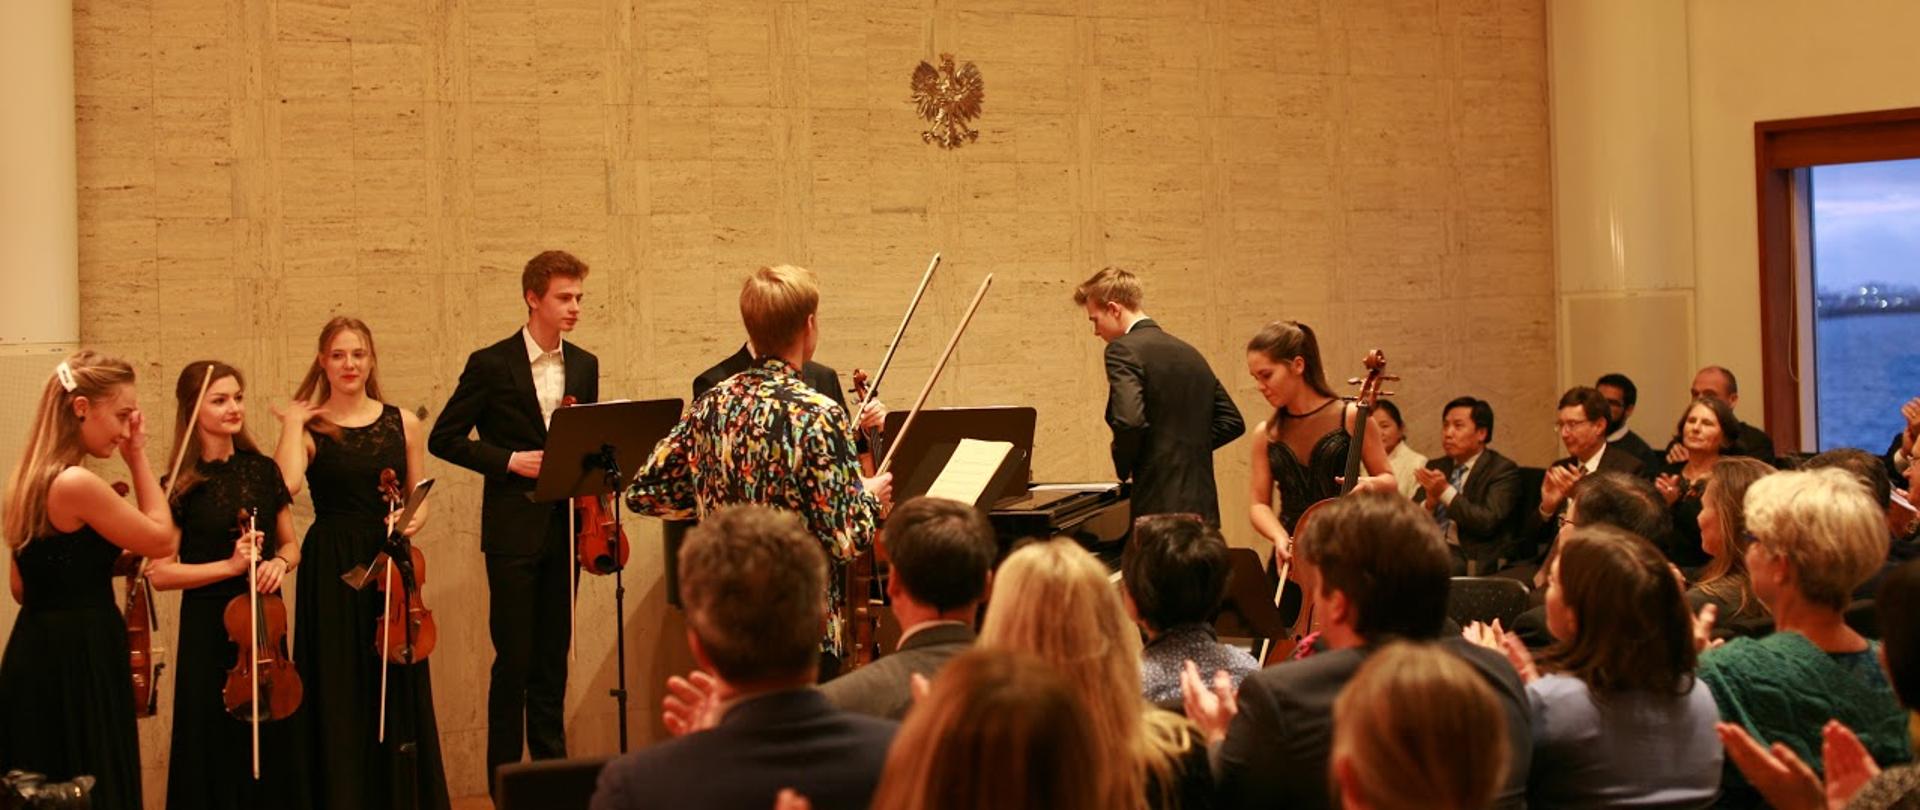 The Four Seasons concert on the occassion of the centenary of diplomatic relations between Poland and Italy